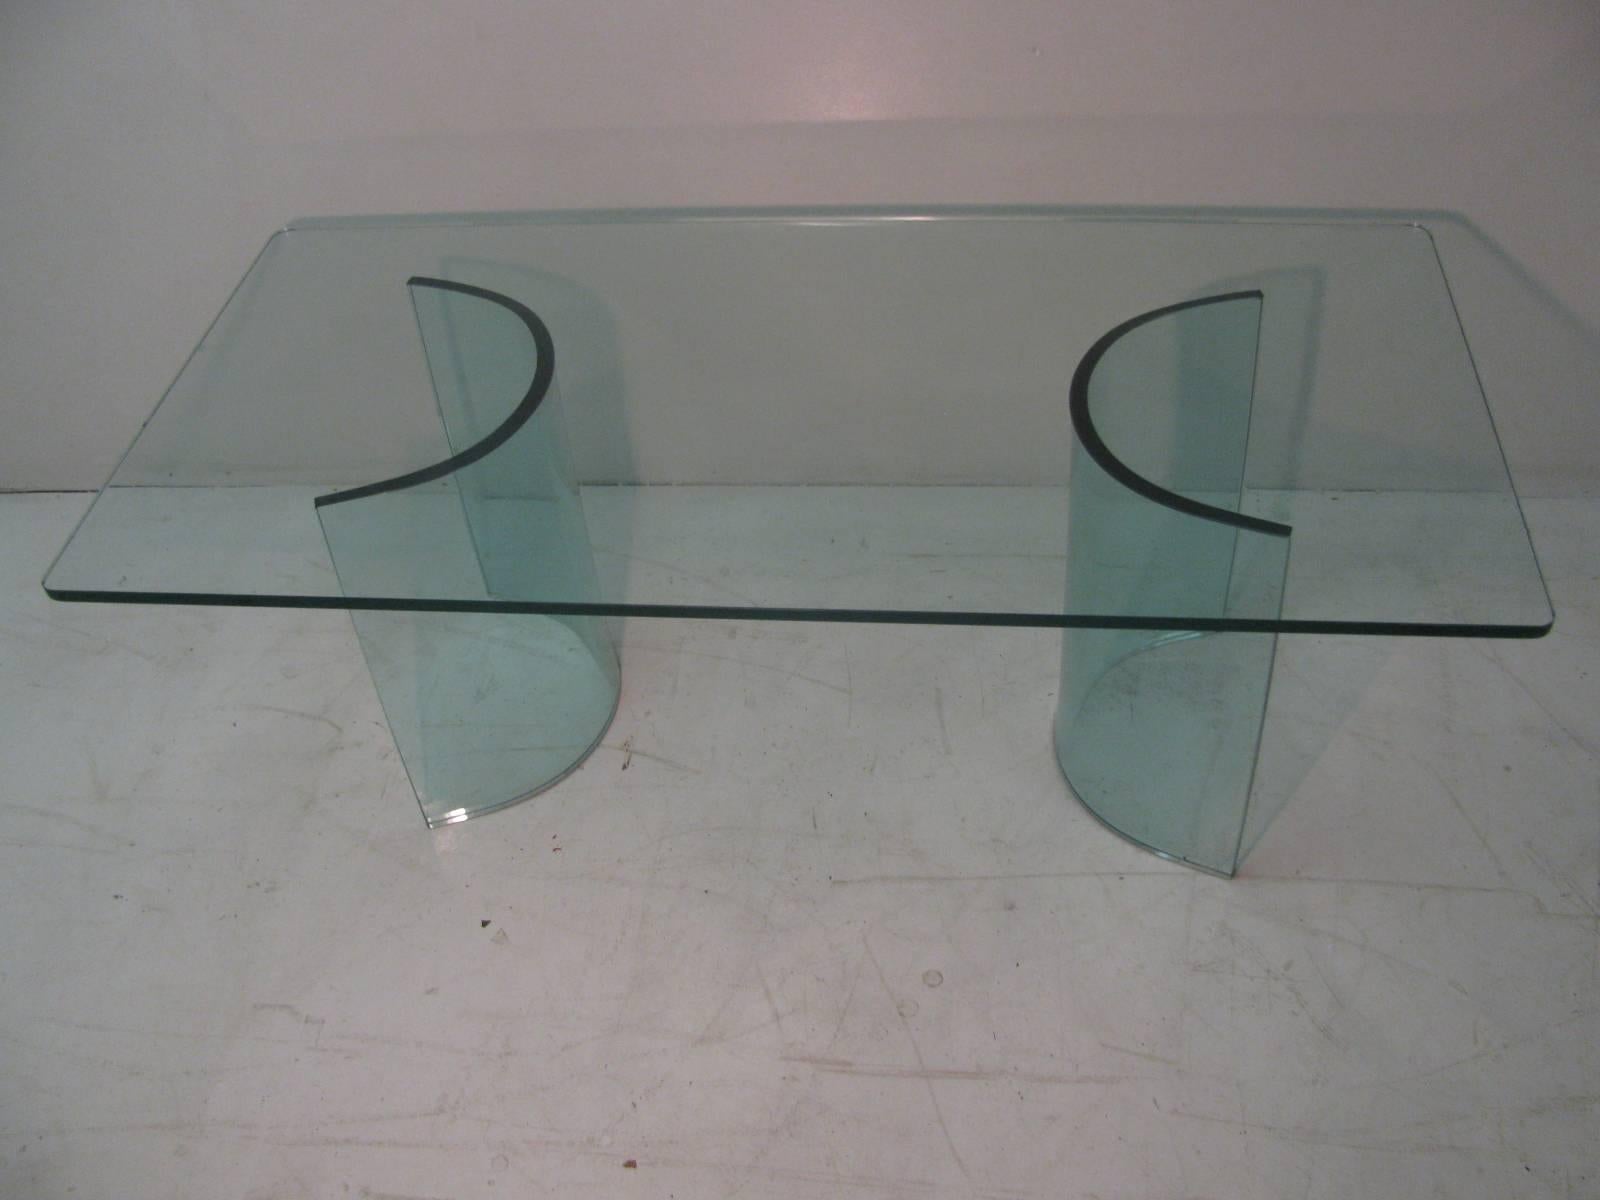 Simple and elegant Italian all glass cocktail table with curved glass panels supporting the rectangular glass top. Inspired by Fontana Arte.